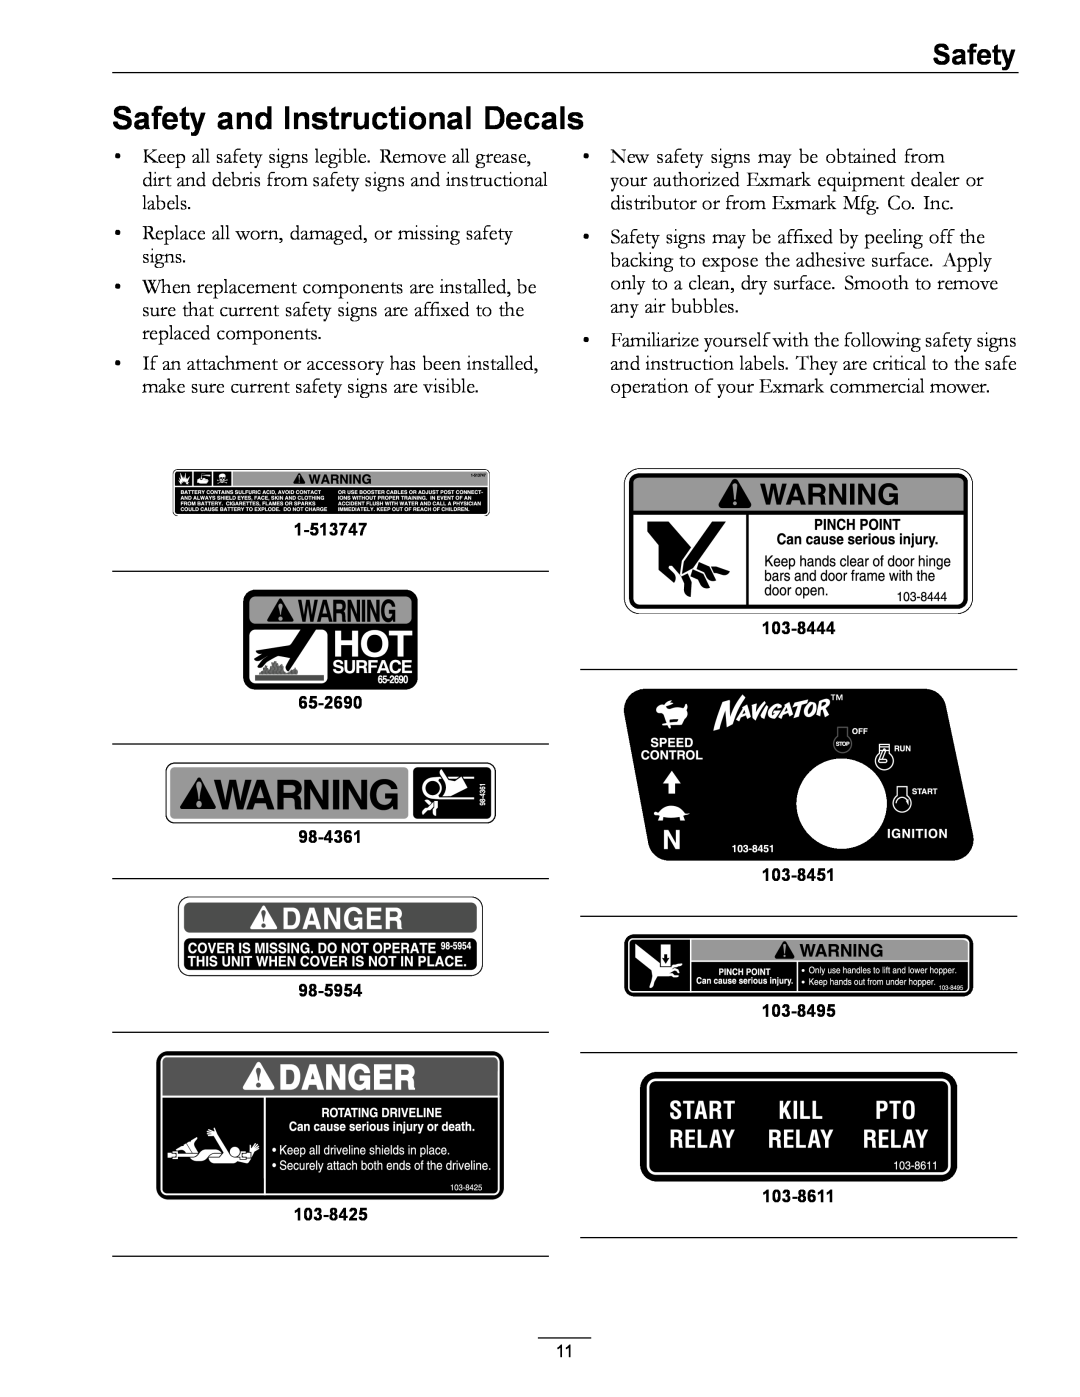 Exmark 850 manual Safety and Instructional Decals 